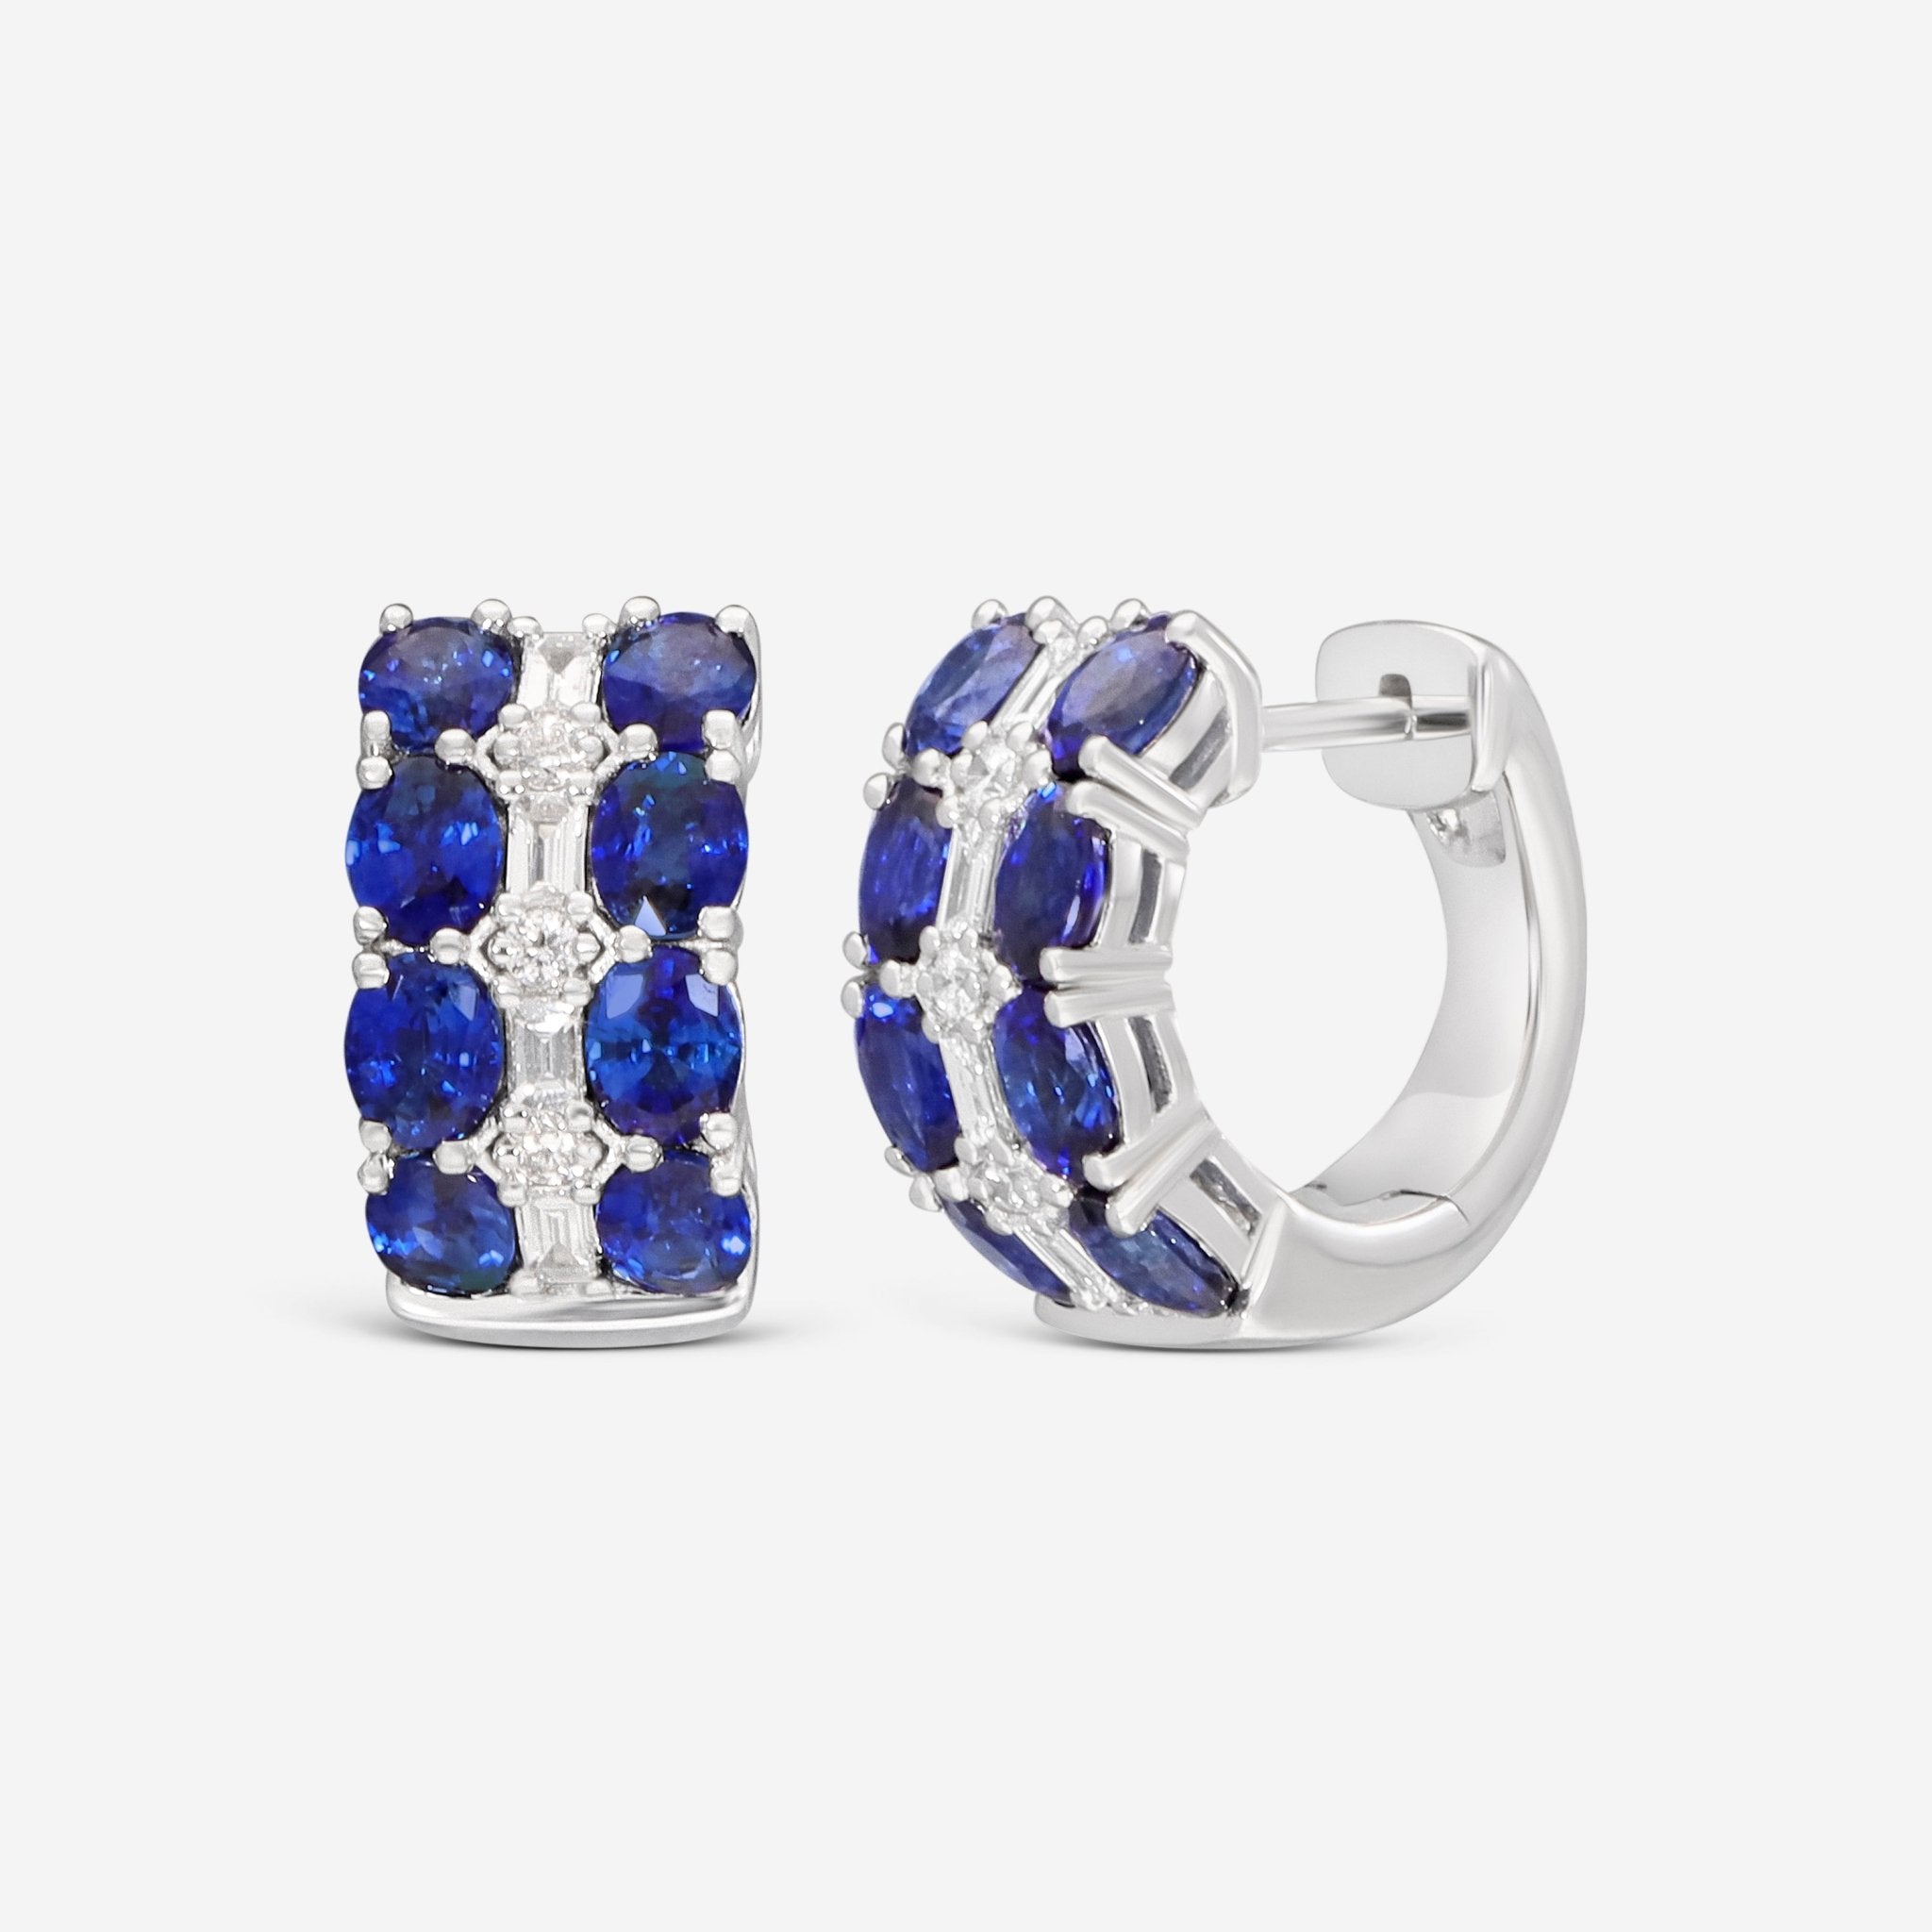 Ina Mar 14K White Gold 0.43ct.tw Diamond and 4.06ct.tw Blue Sapphire Earrings IMKGK42 - THE SOLIST - Ina Mar